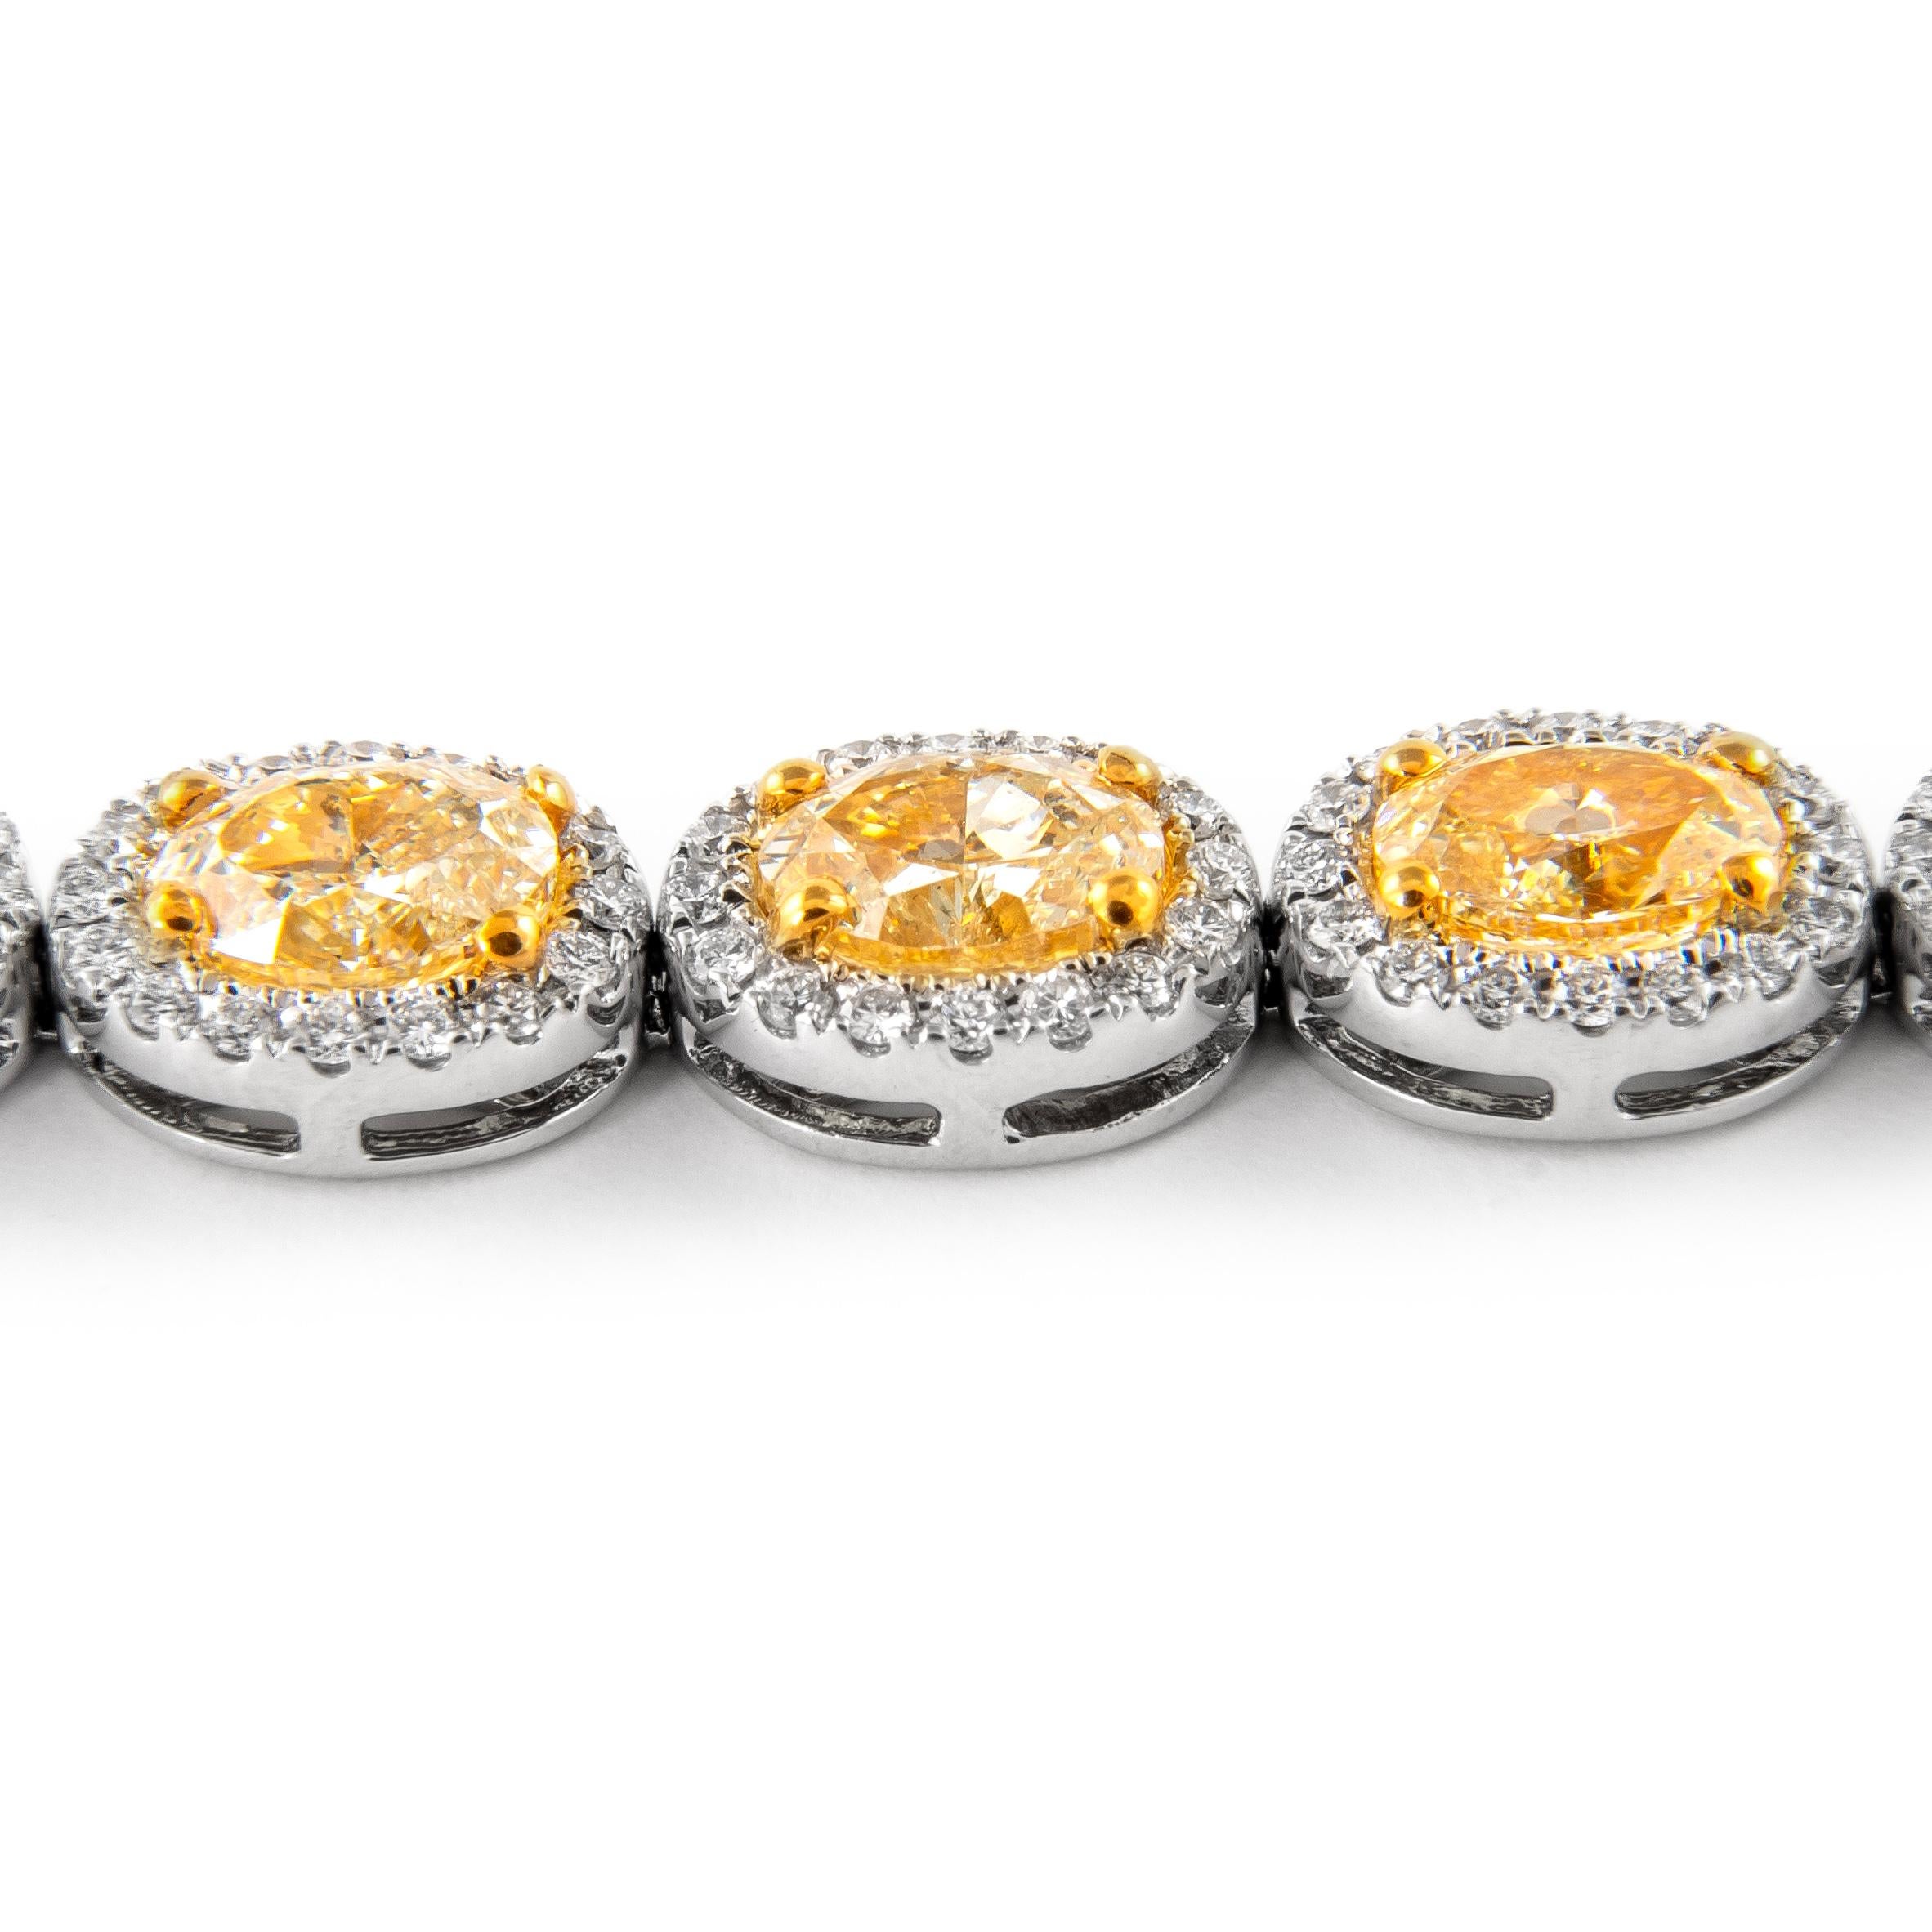 Modern Alexander Beverly Hills 11.14ct Oval Yellow Diamond Bracelet with Halo 18k For Sale